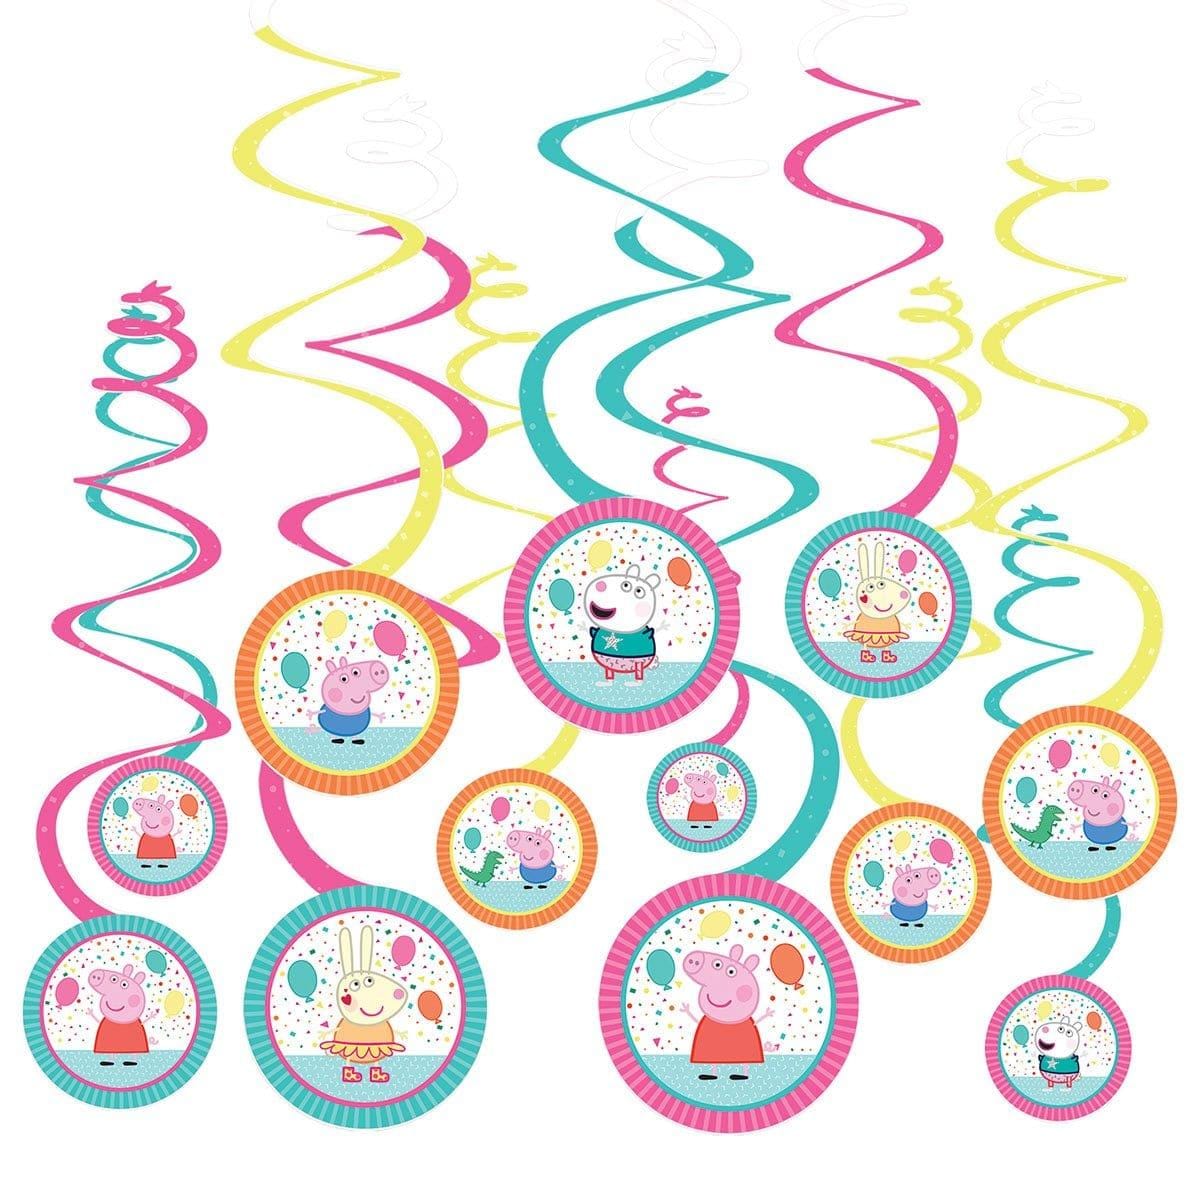 Buy Kids Birthday Peppa Pig Confetti Swirl Decorations, 12 Counts sold at Party Expert